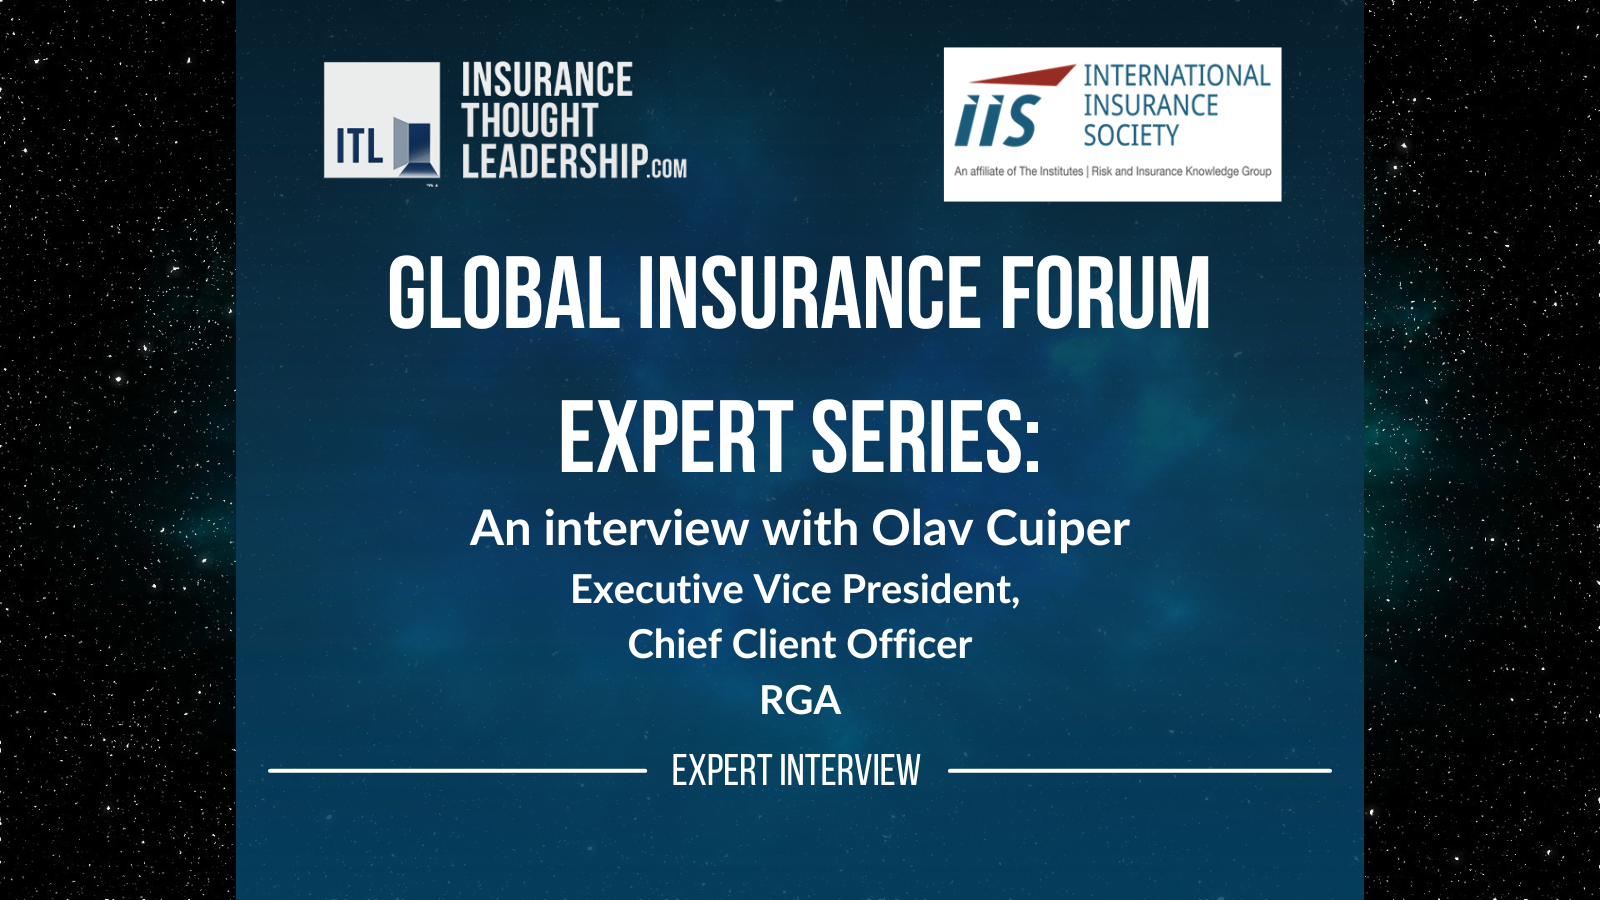 Global Insurance Forum Experts Series: An Interview with Olav Cuiper